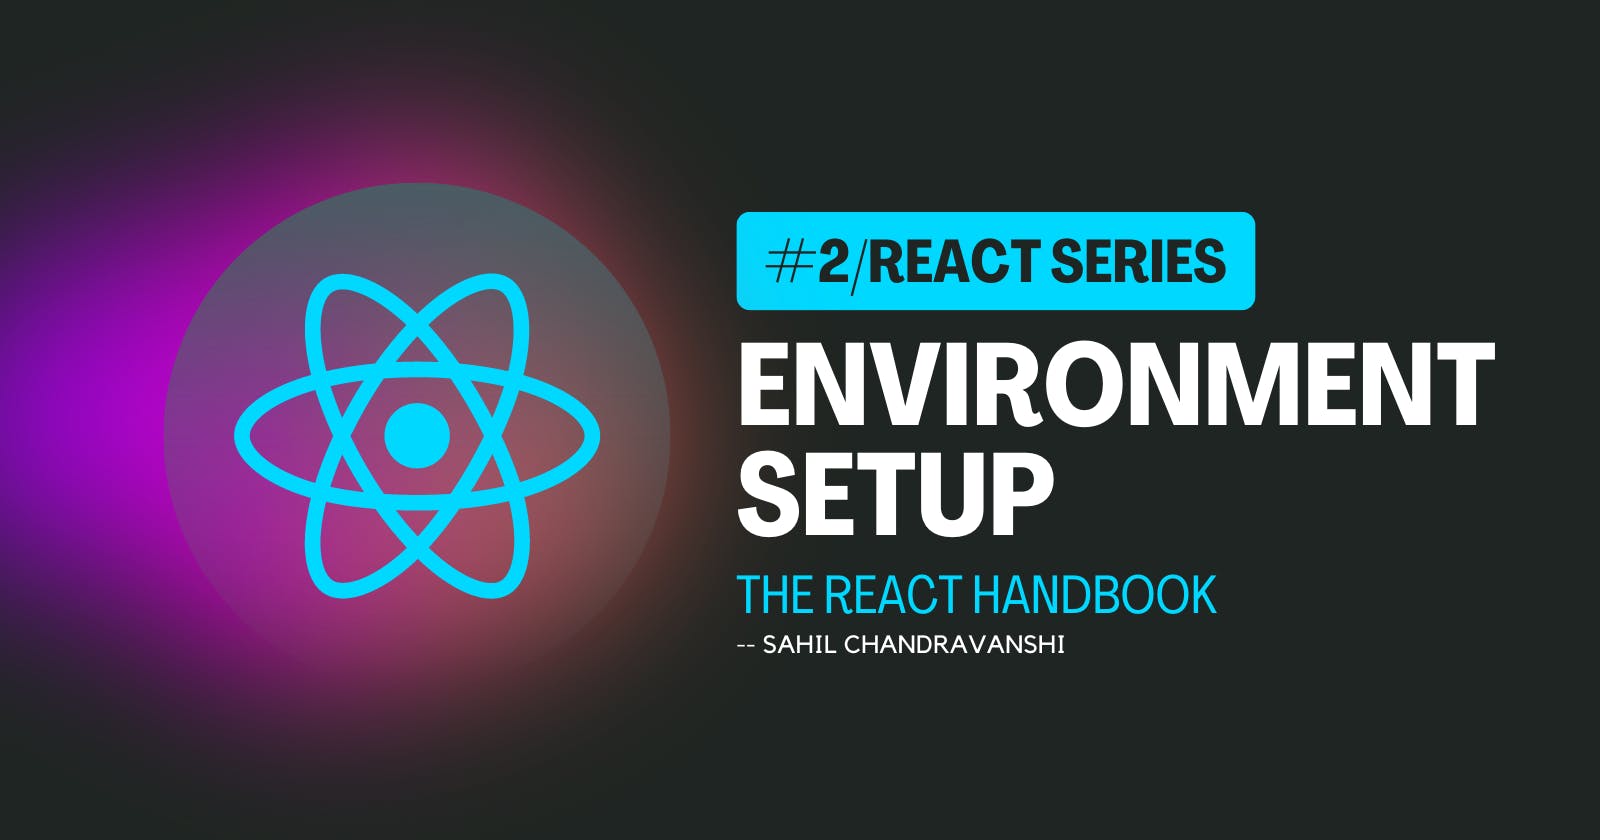 React Installation Made Easy: Follow These Simple Steps for Quick Setup